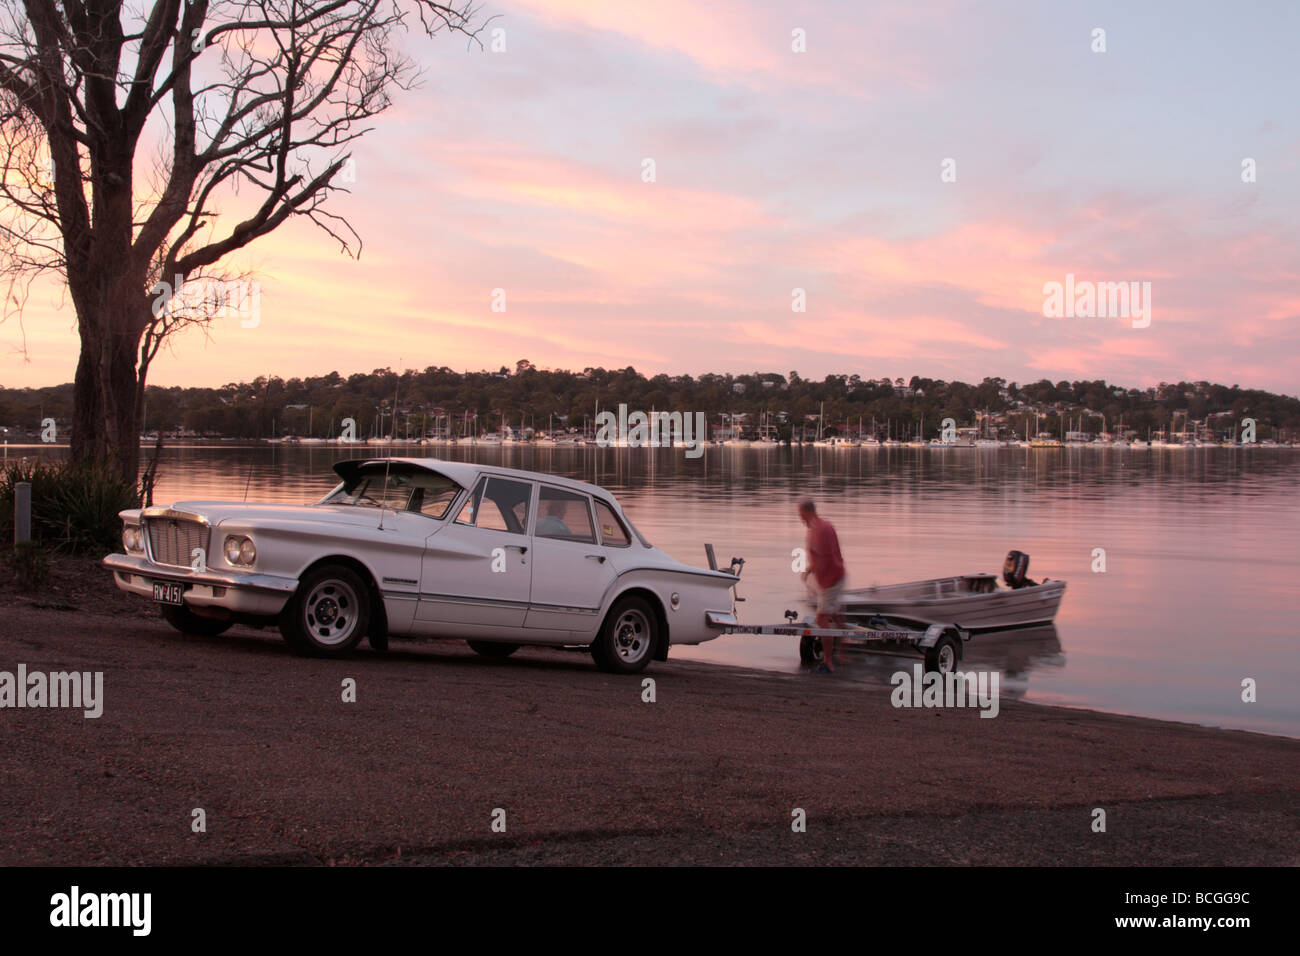 Launching a boat at dawn on lake Macquarie north of Sydney in New South wales Australia Stock Photo